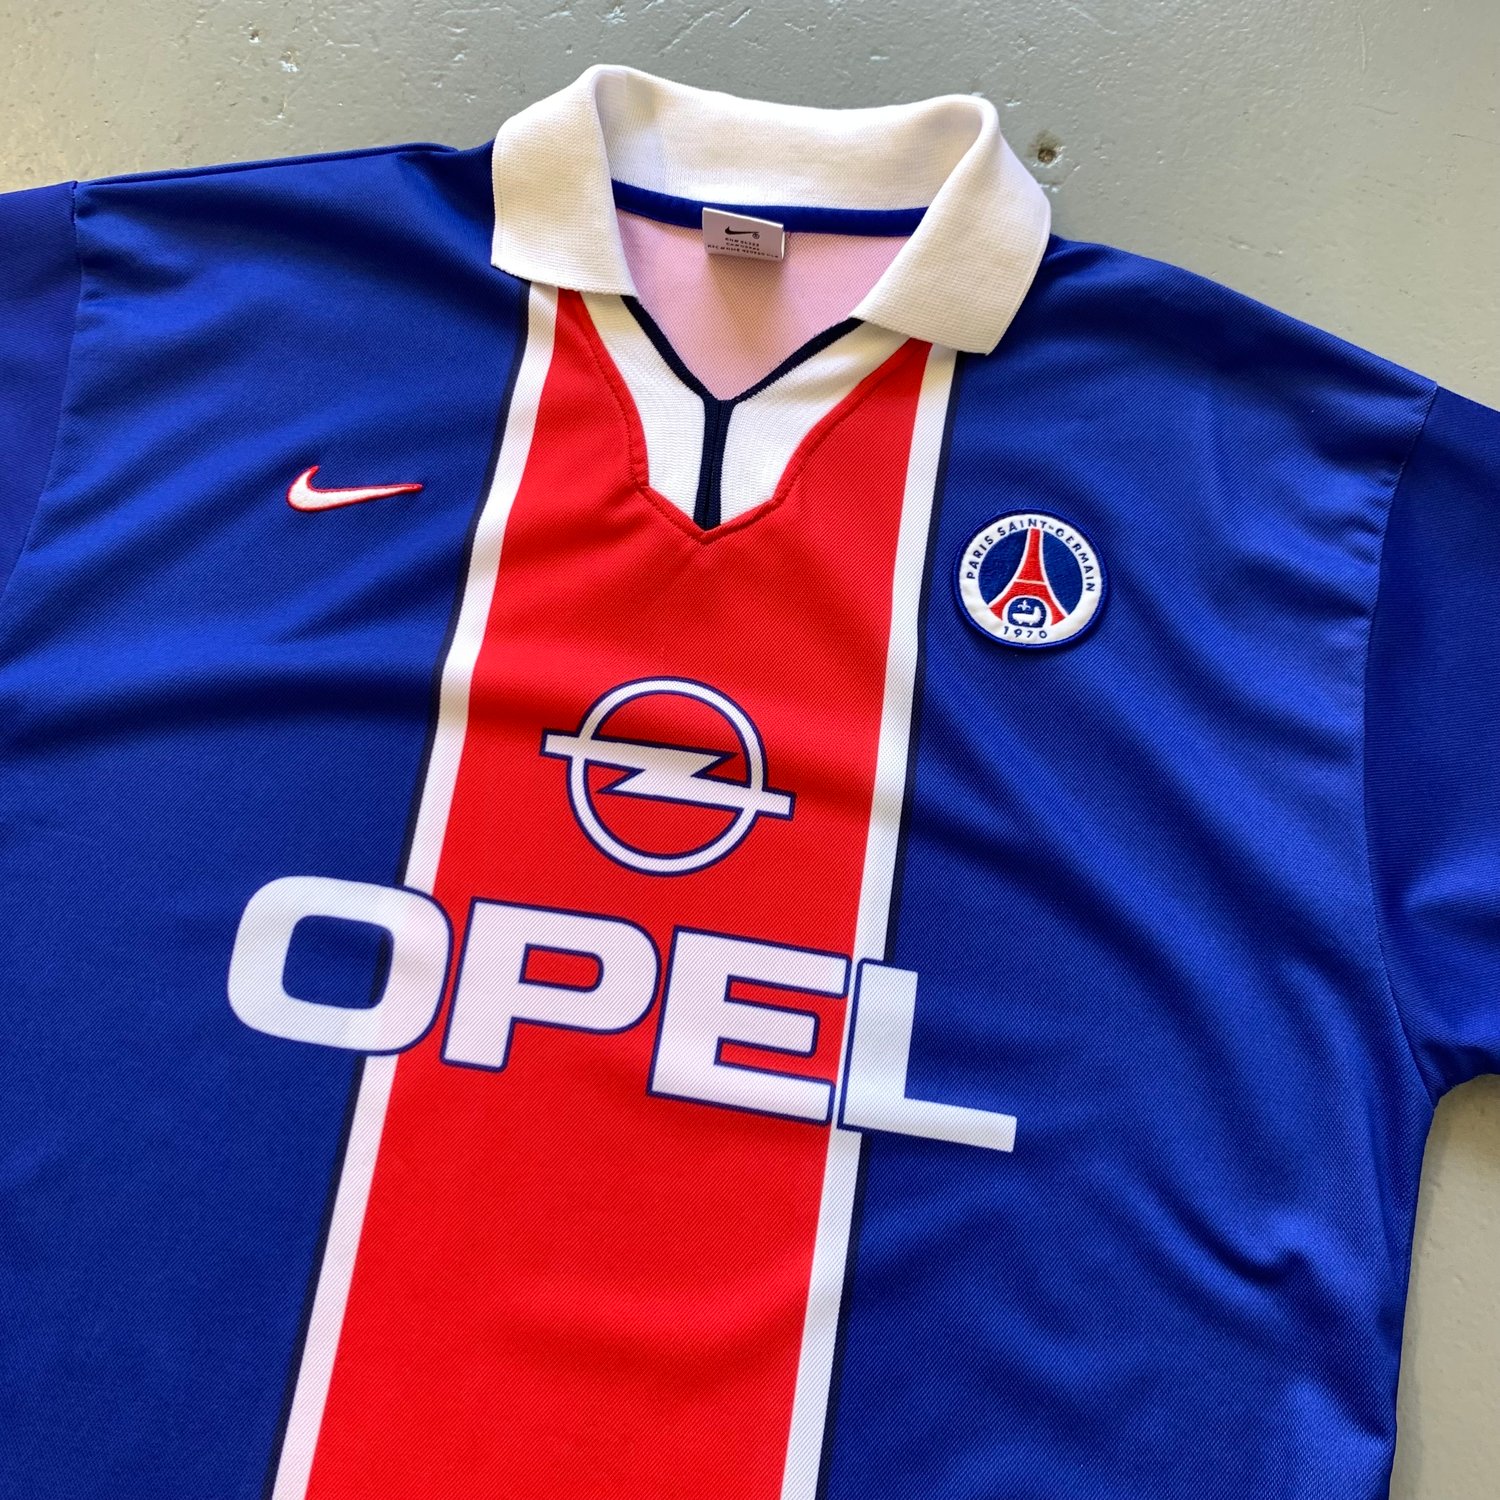 Image of 97/98 PSG Home shirt size xl 